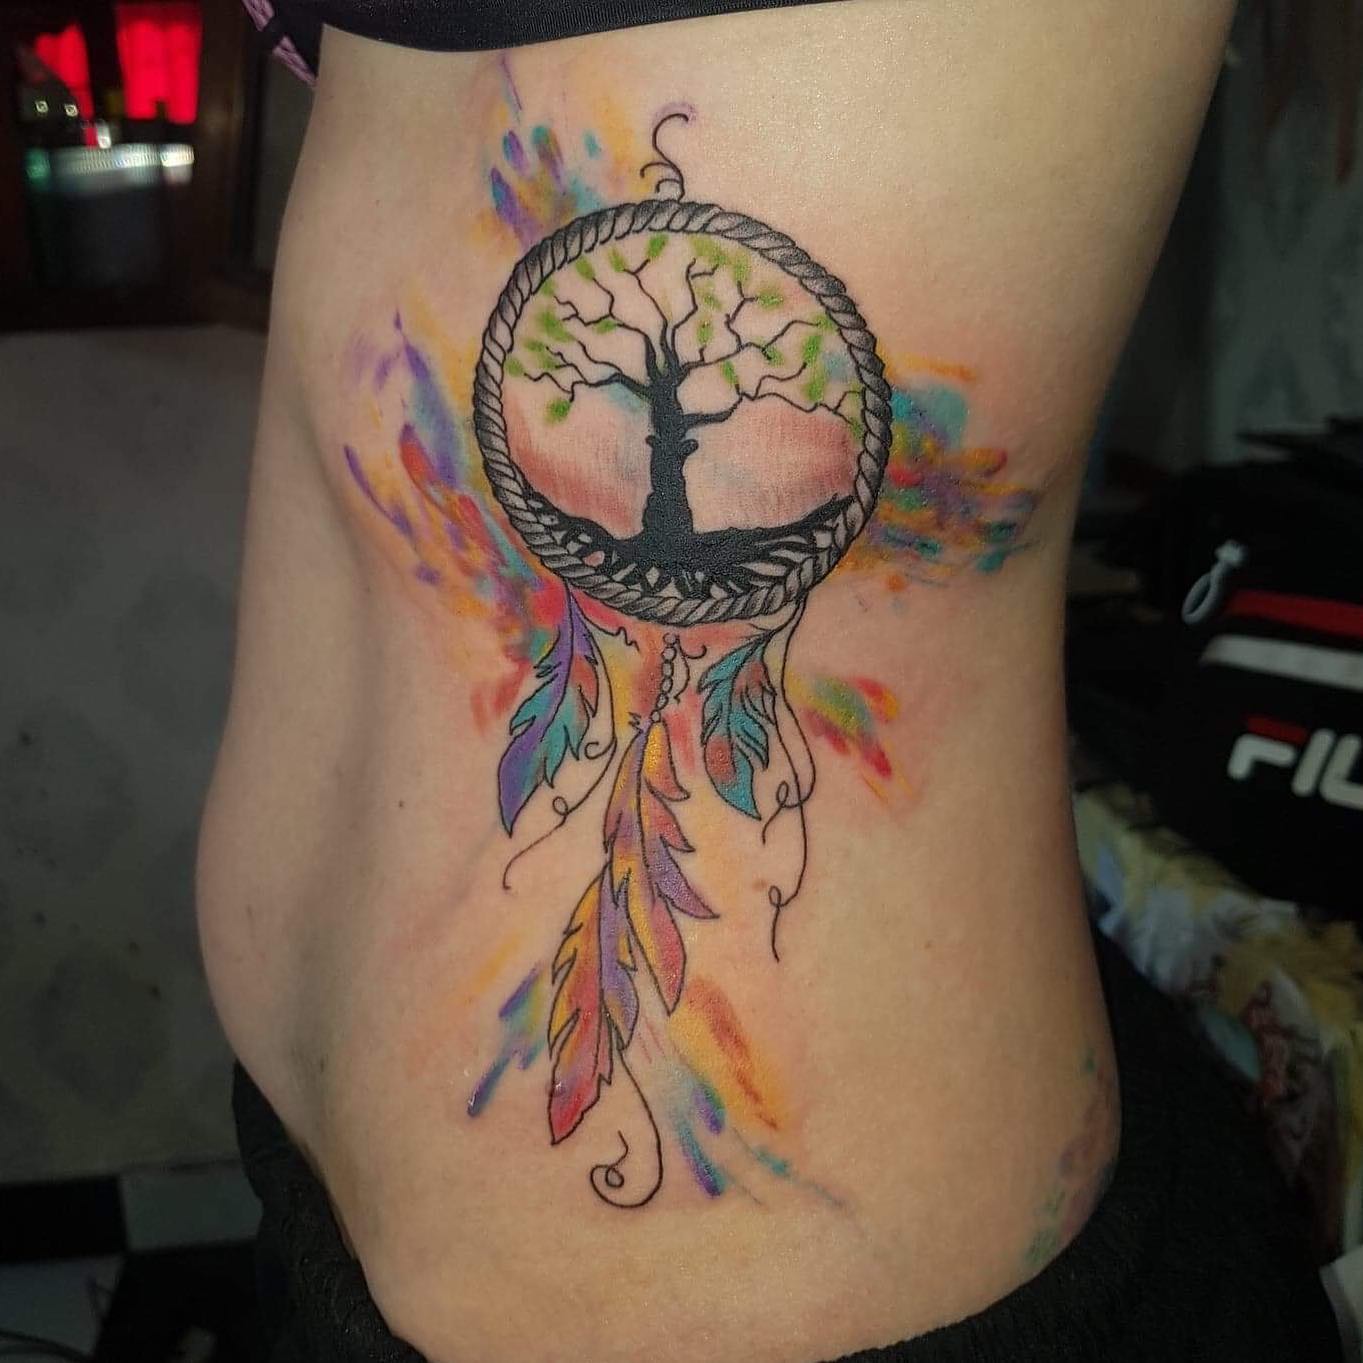 A tree of life tattoo is a symbol that represents a person's connection to their family, friends and ancestors. It can also be used as a way to celebrate the natural world and all of its beauty. As a creative tattoo, tree of life with a dream catcher looks amazing!